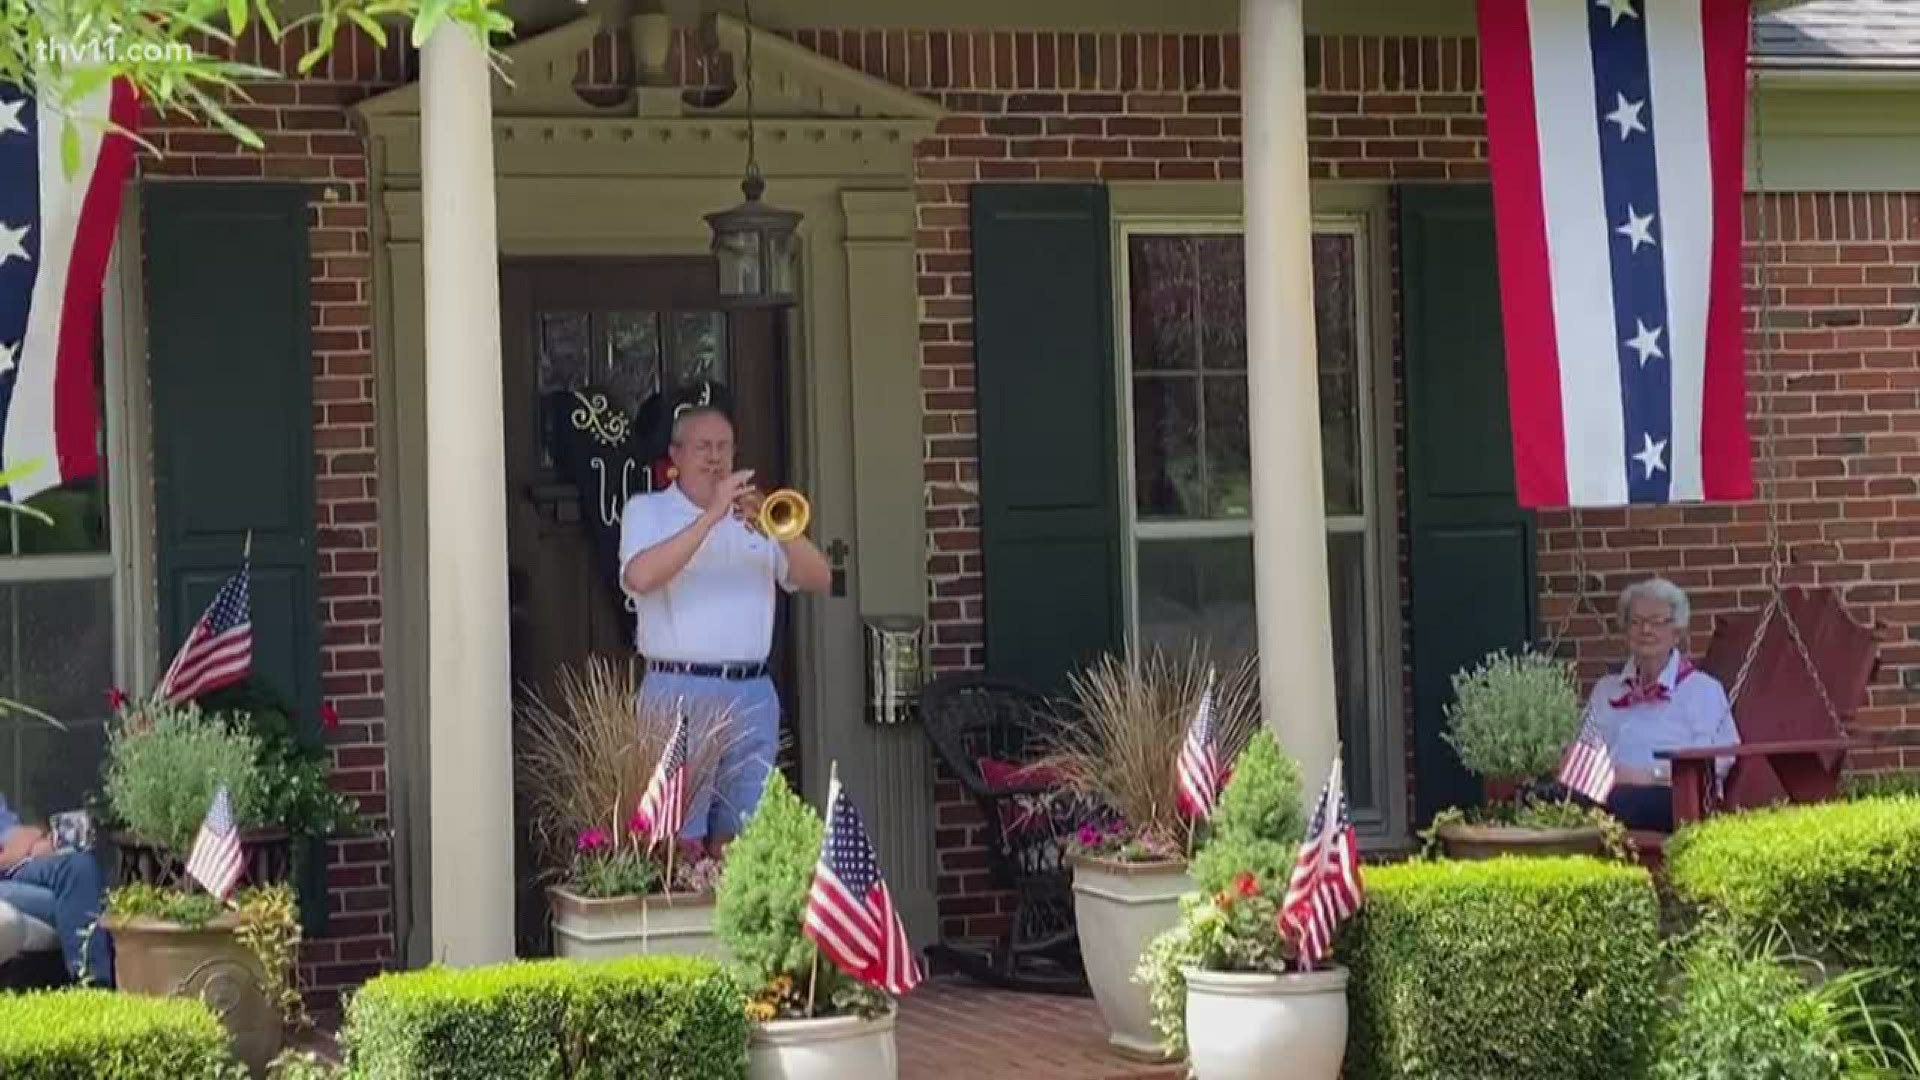 Taps Across America, a movement to encourage musicians to step outside and play on Memorial Day, made it's way to Little Rock as Bob Roberts played for his family.